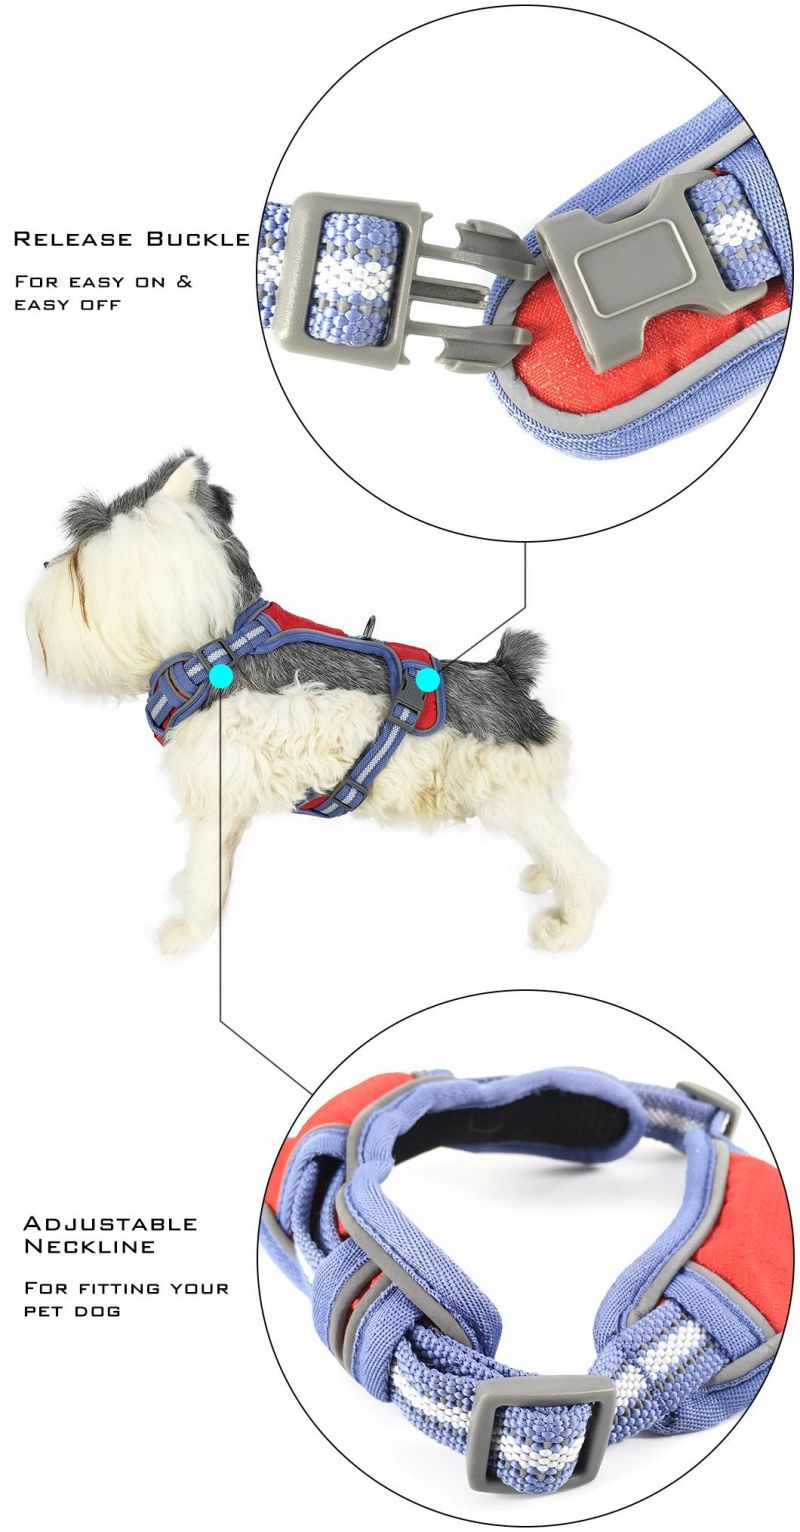 Dog Harness Breathable Safe Adjustable Lightweight Reflective Portable Outdoor Wholesale Dog Products